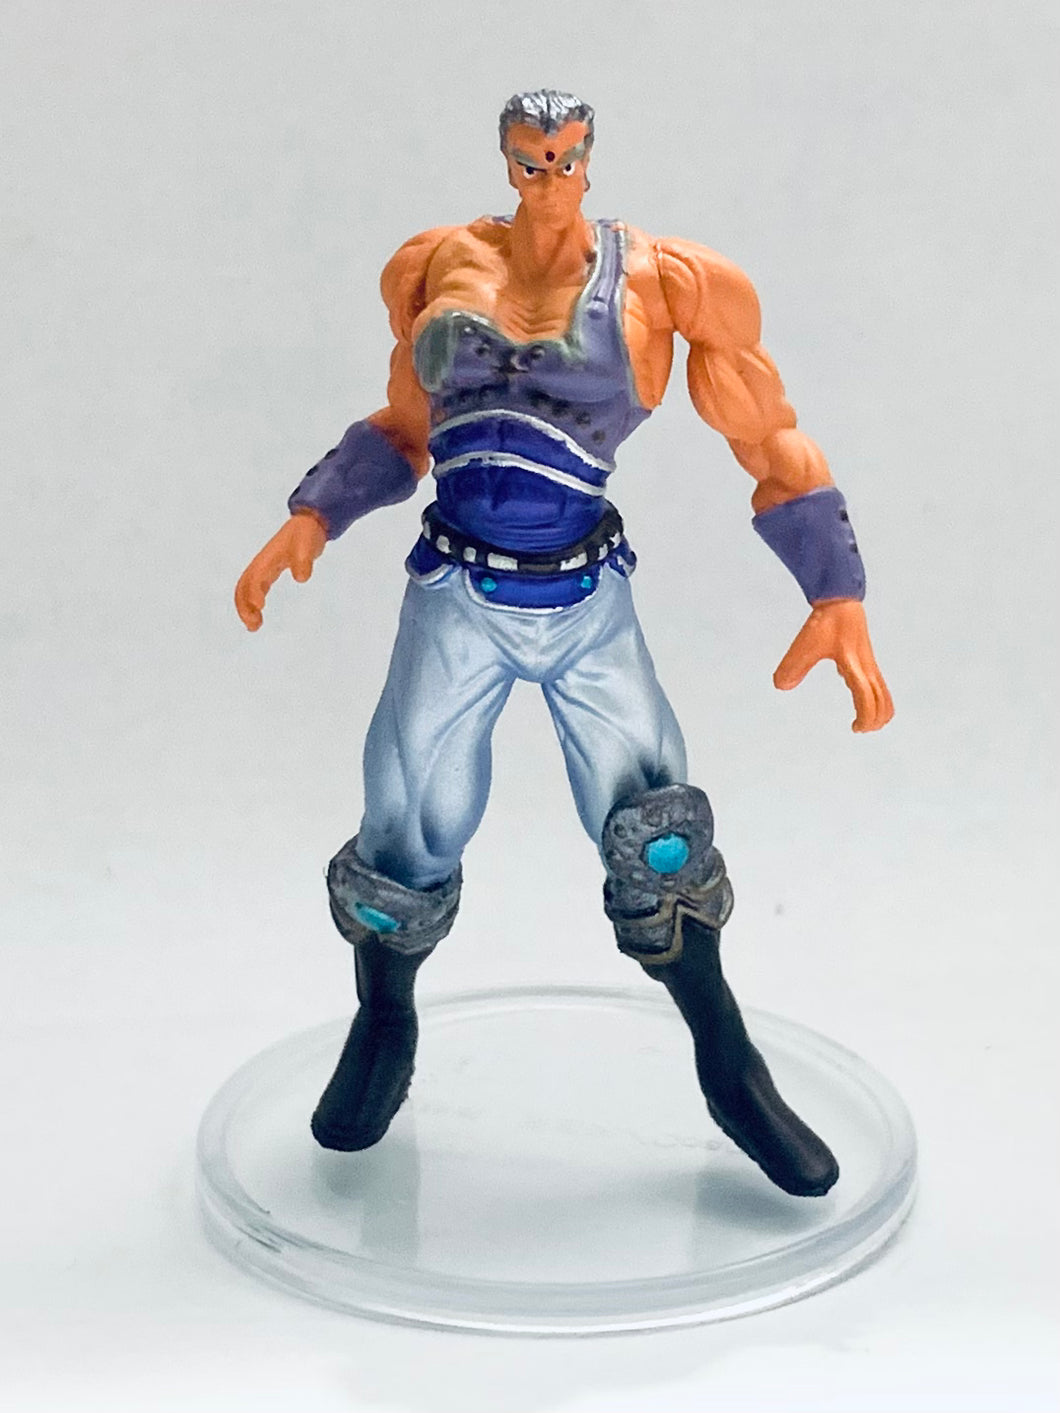 Hokuto no Ken - Souther - Fist of the North Star All-Star Retsuden Capsule Figure Collection Part 1 - Repainted ver.